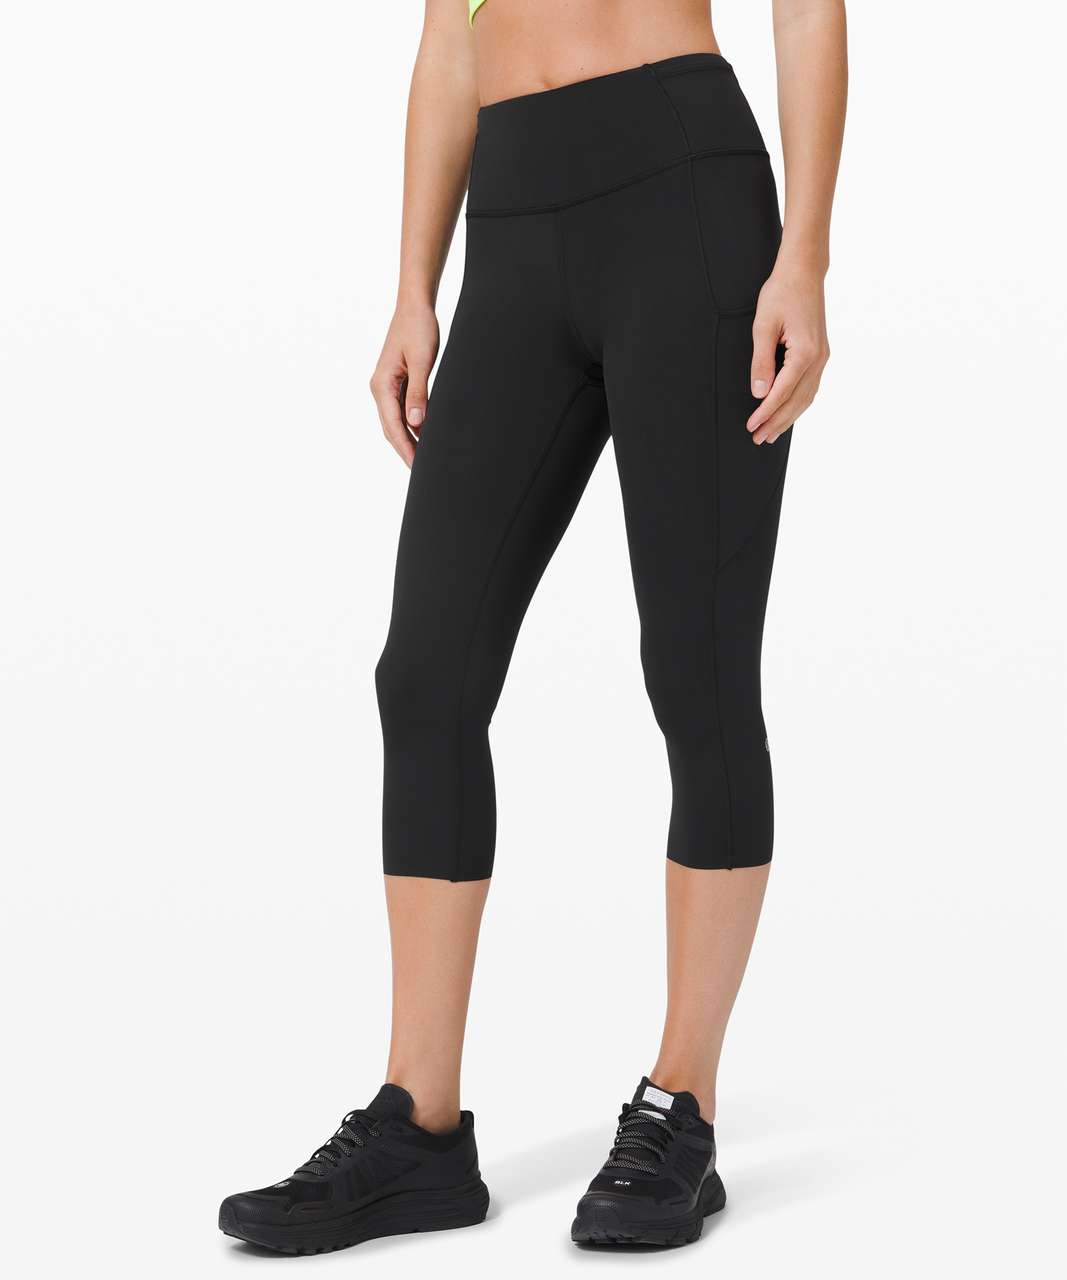 Lululemon Fast and Free Crop II 19" *Non-Reflective Cool - Black